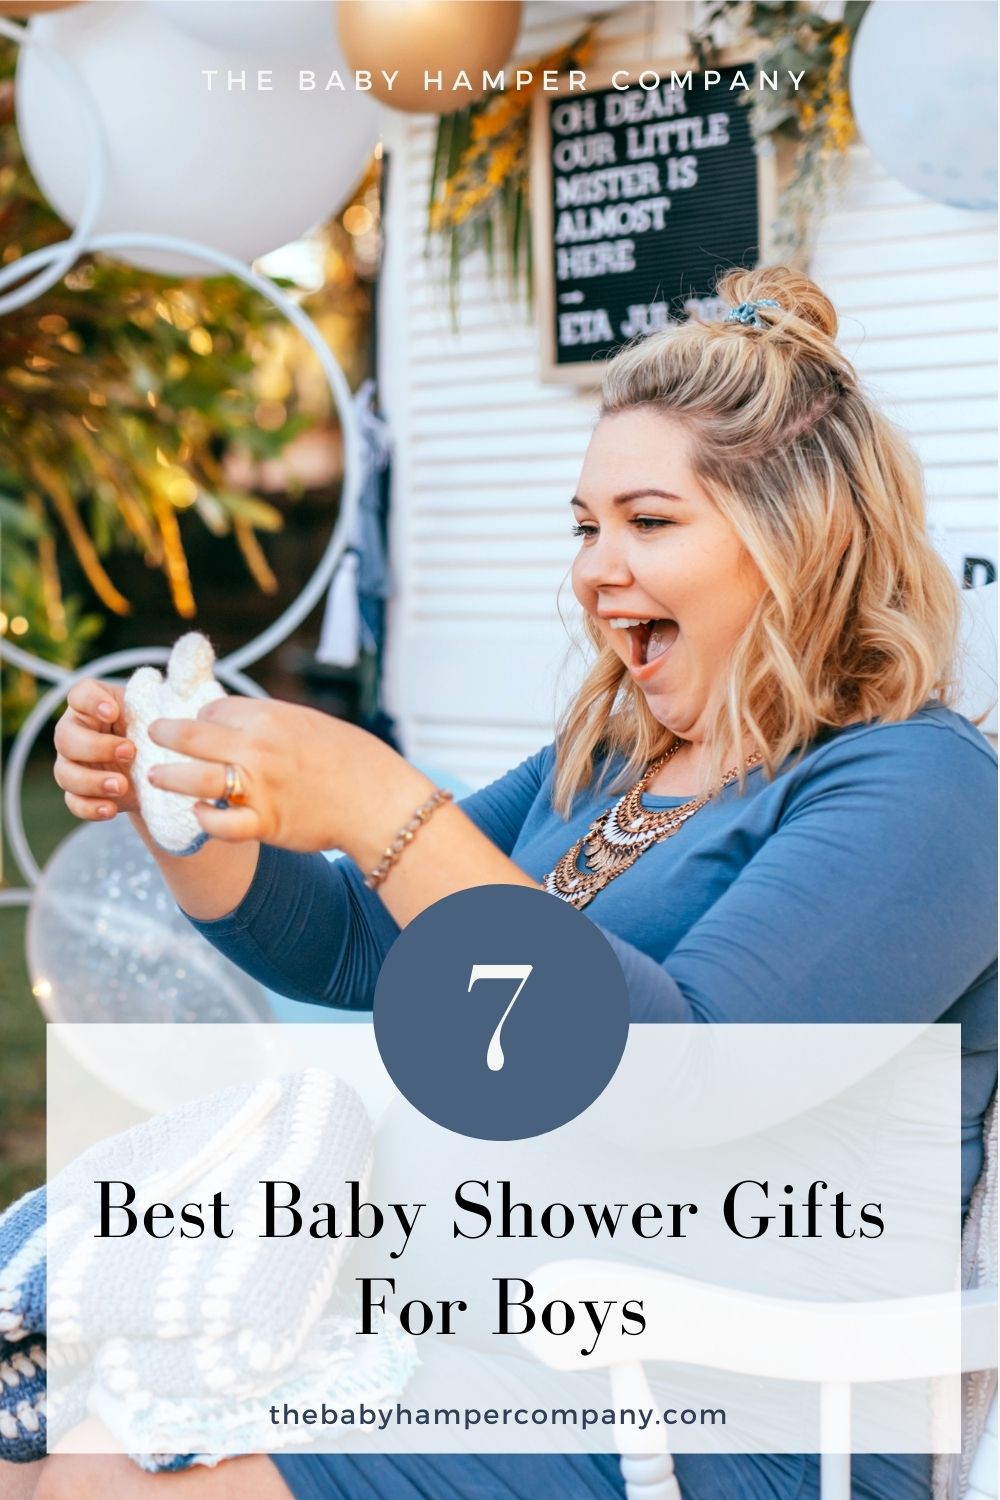 Best Baby Shower Gifts for Boys